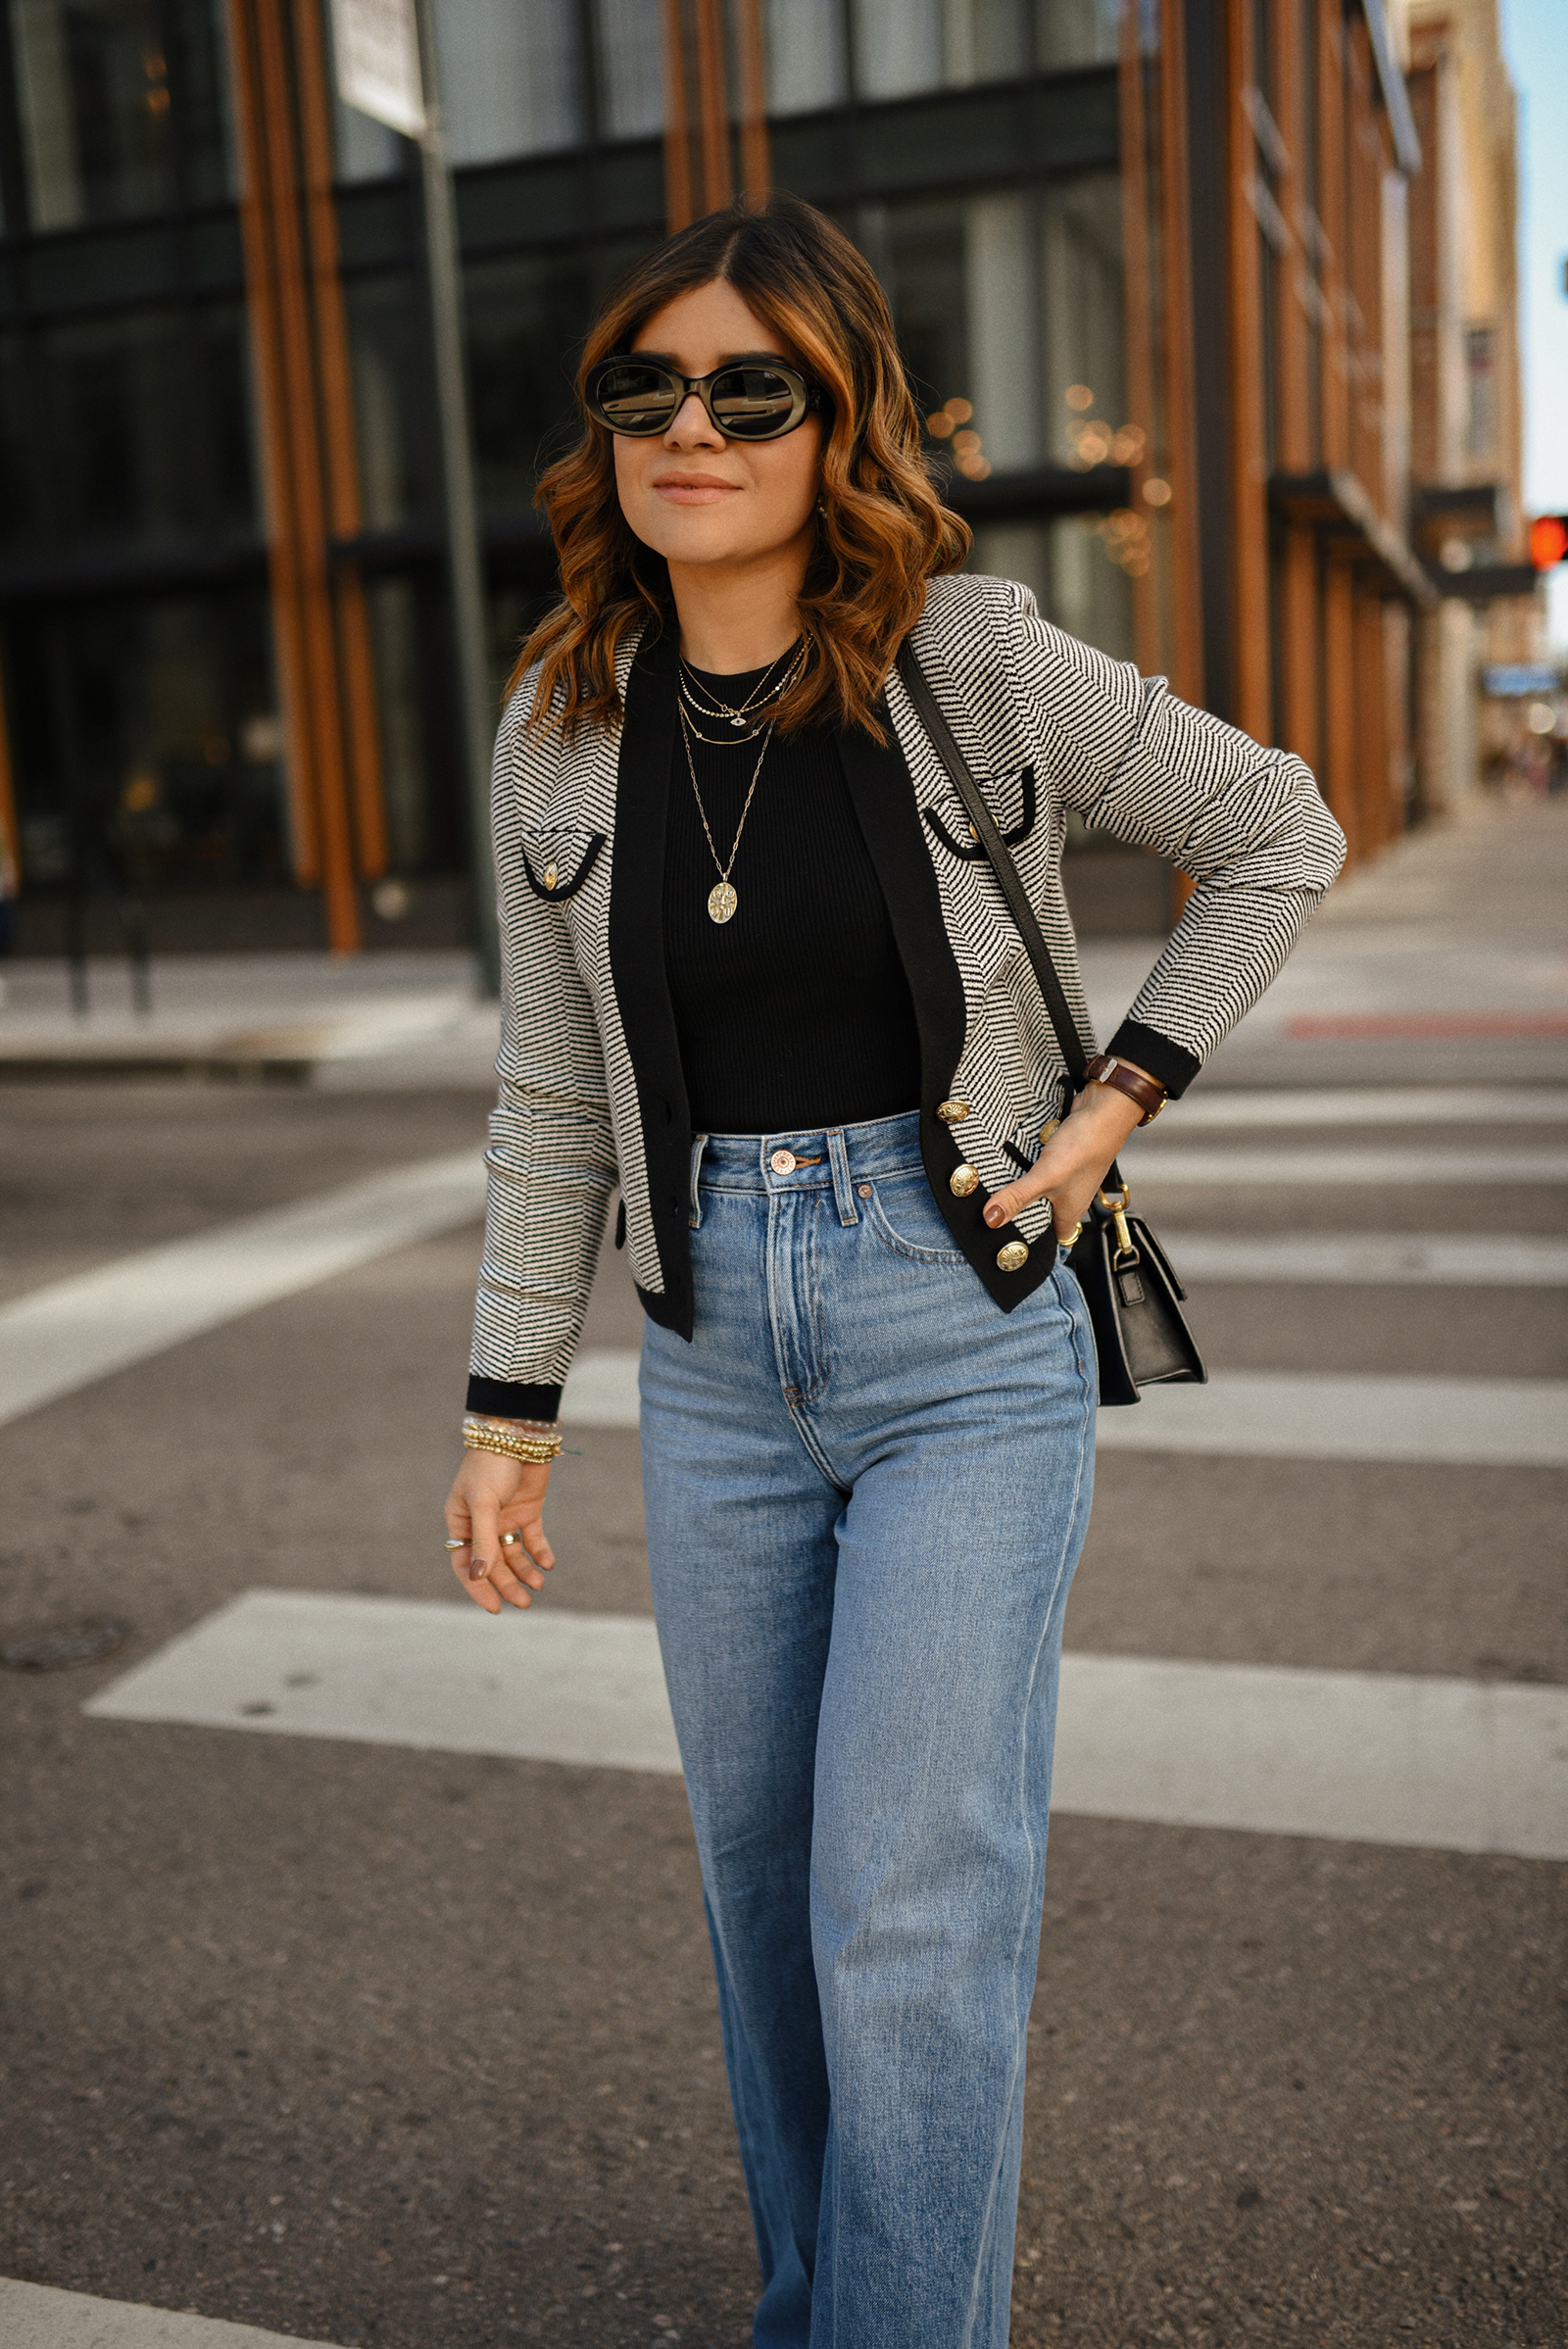 CAROLINA HELLAL FROM CHIC TALK WEARING WIDE LEG JEANS VIA EXPRESS, CHANEL INSPIRED JACKET, JACQUEMUS LE GRAND BAMBINO TOP HANDLE BAG, AND CELINE TRIOMPHE SUNGLASSES.